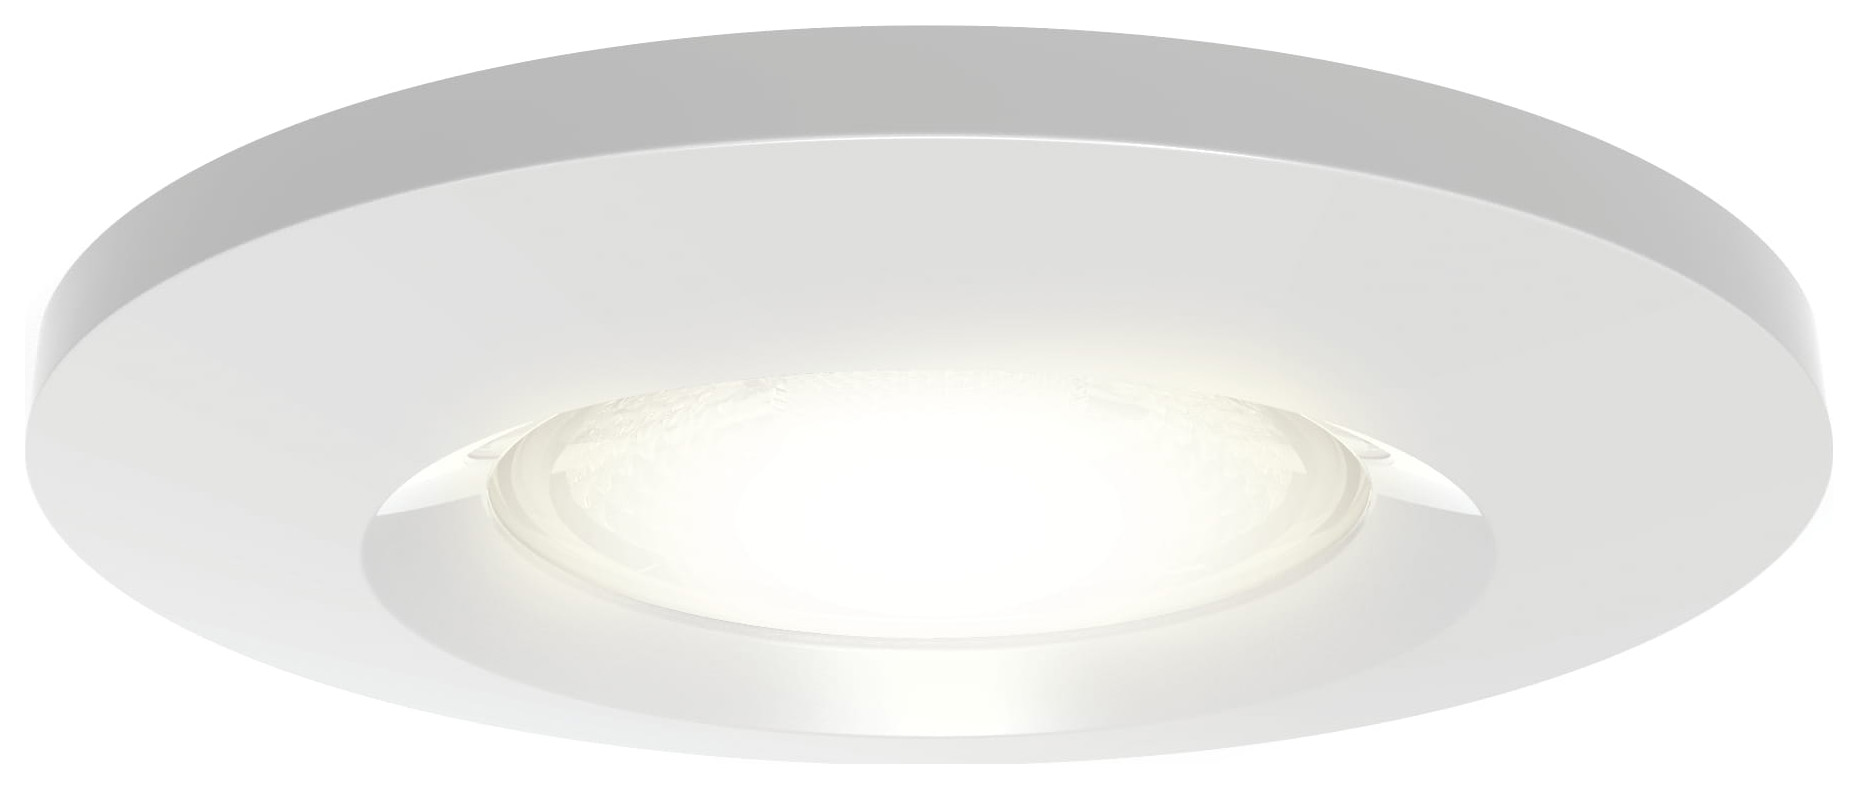 4Lite IP65 LED 4000K Fire Rated Downlight - Pack of 3